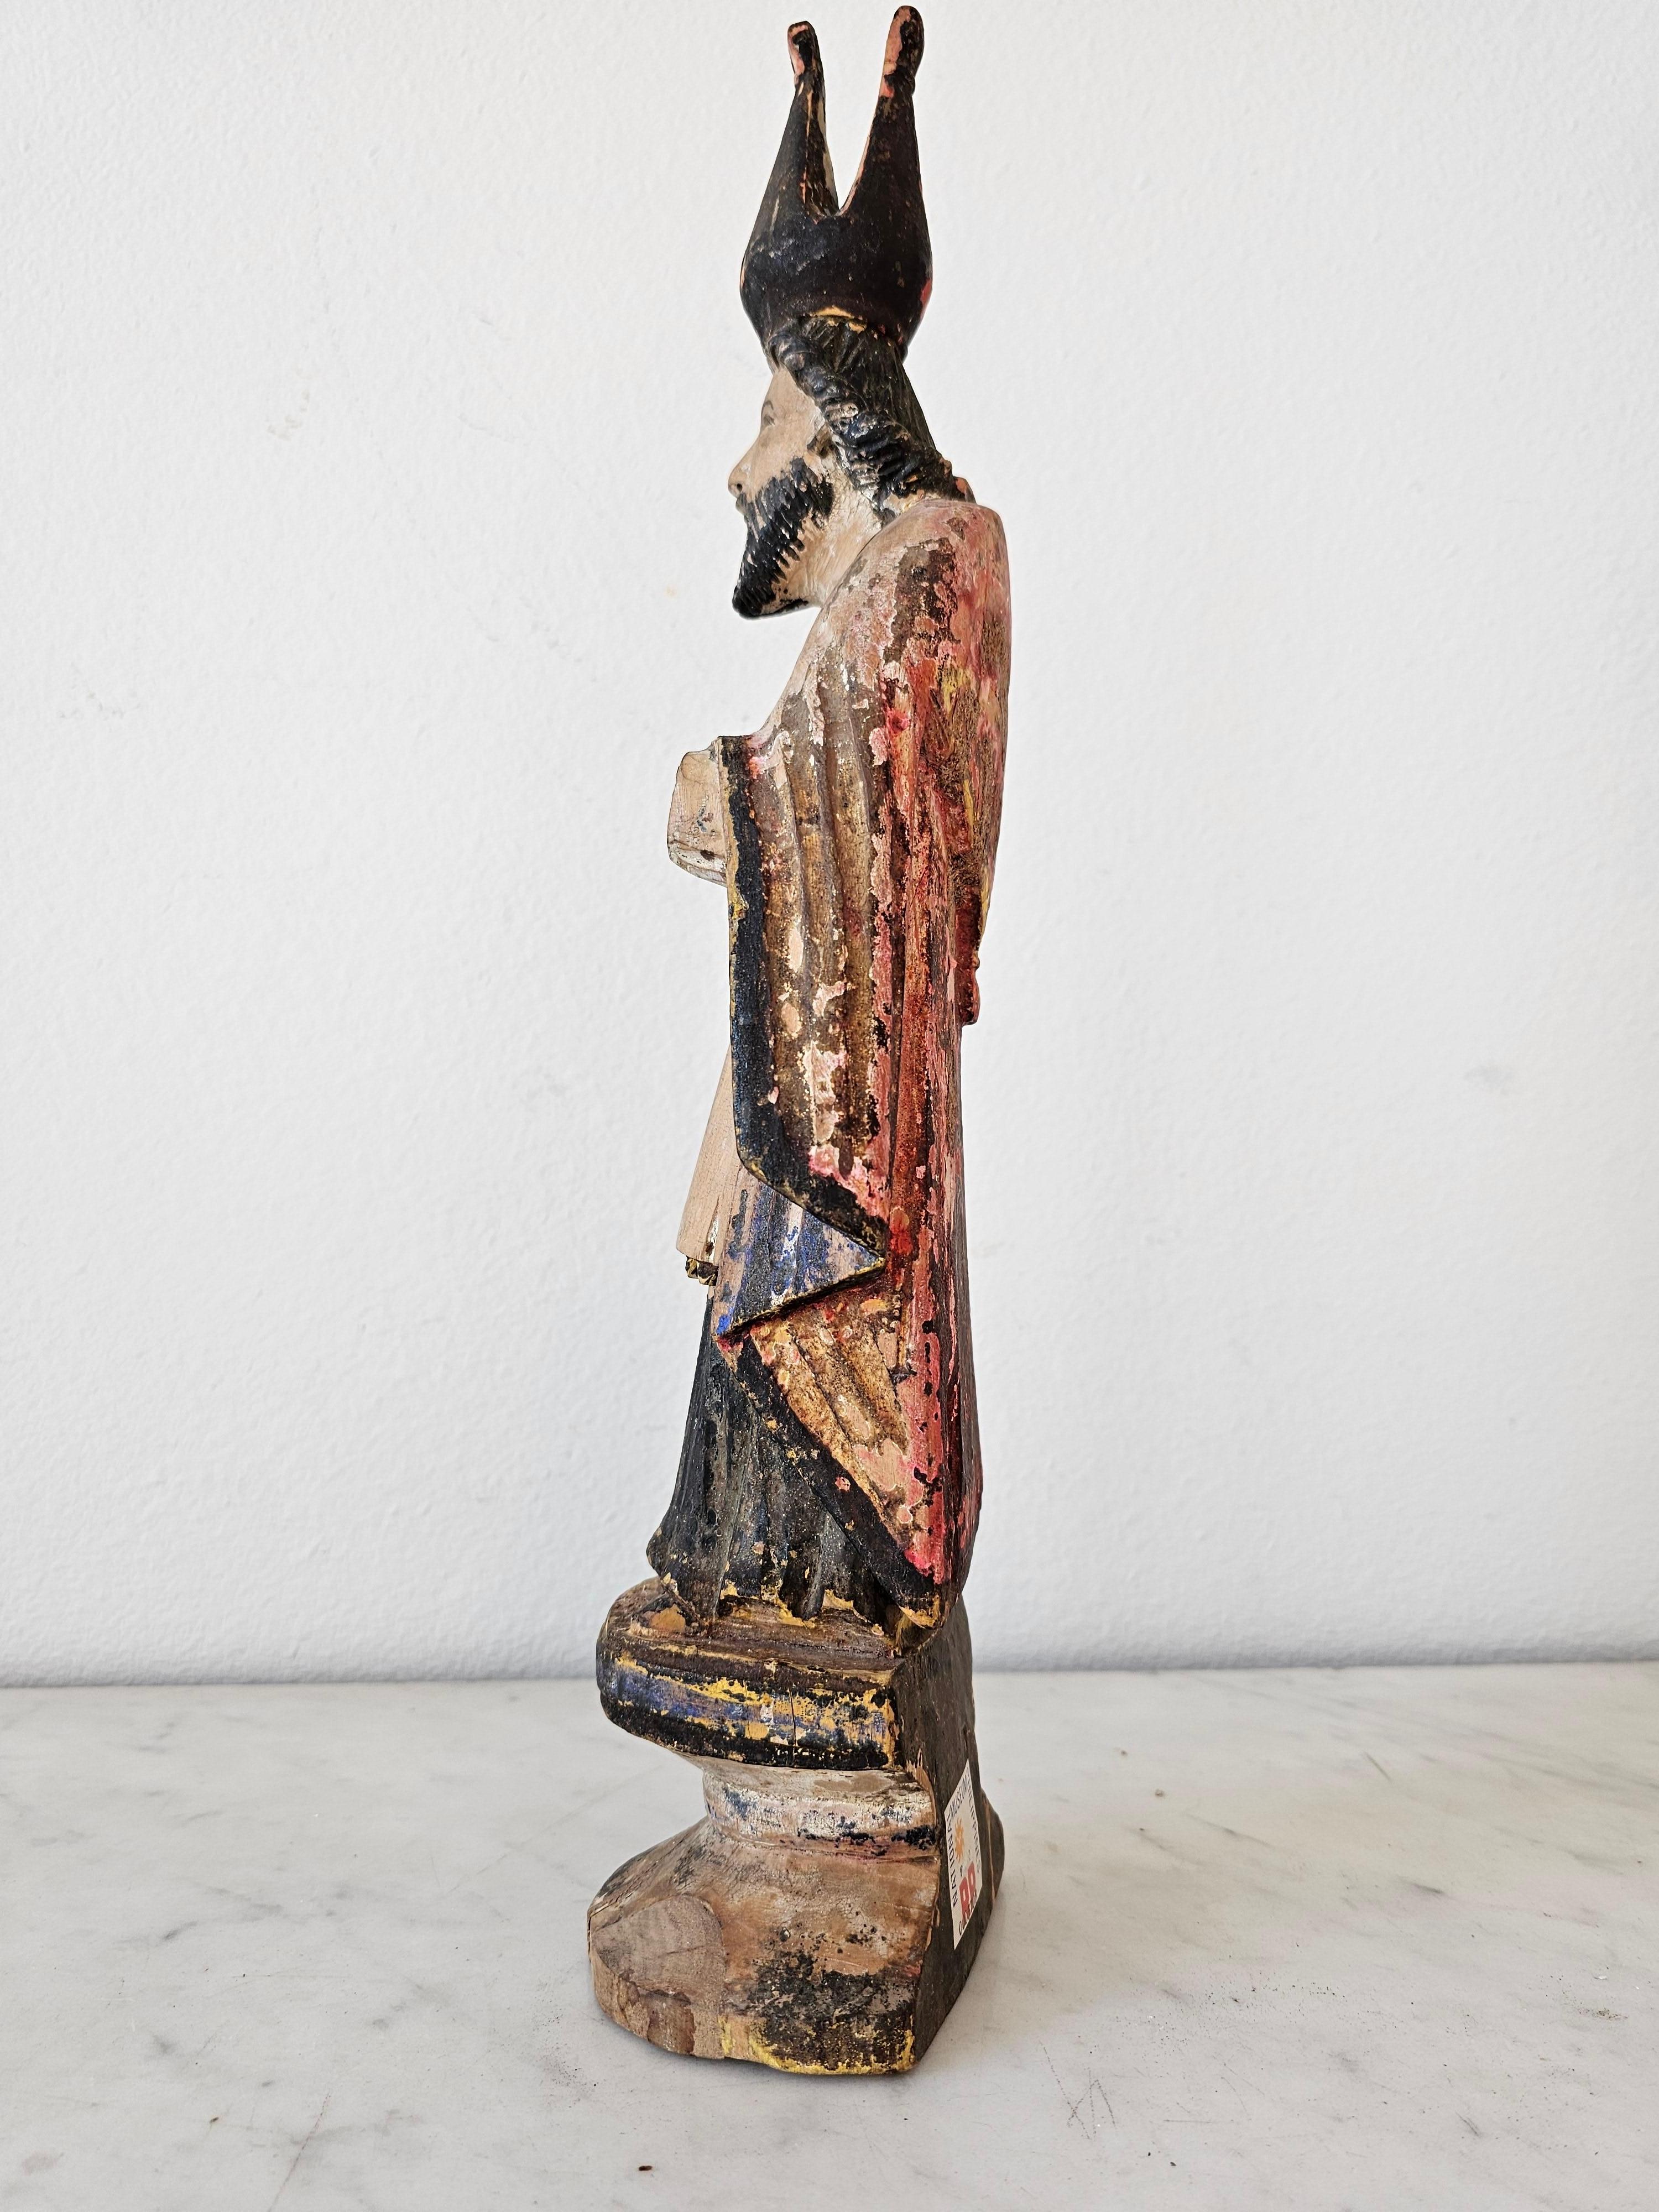 A scarce Spanish Colonial Hispano-Philippine hand carved santo altar figure sculpture. circa 1810

Handmade by Spanish settlers / colonists in the Philippines, late 18th / early 19th century, Bishop Saint, likely depicting Saint Isidore of Seville,